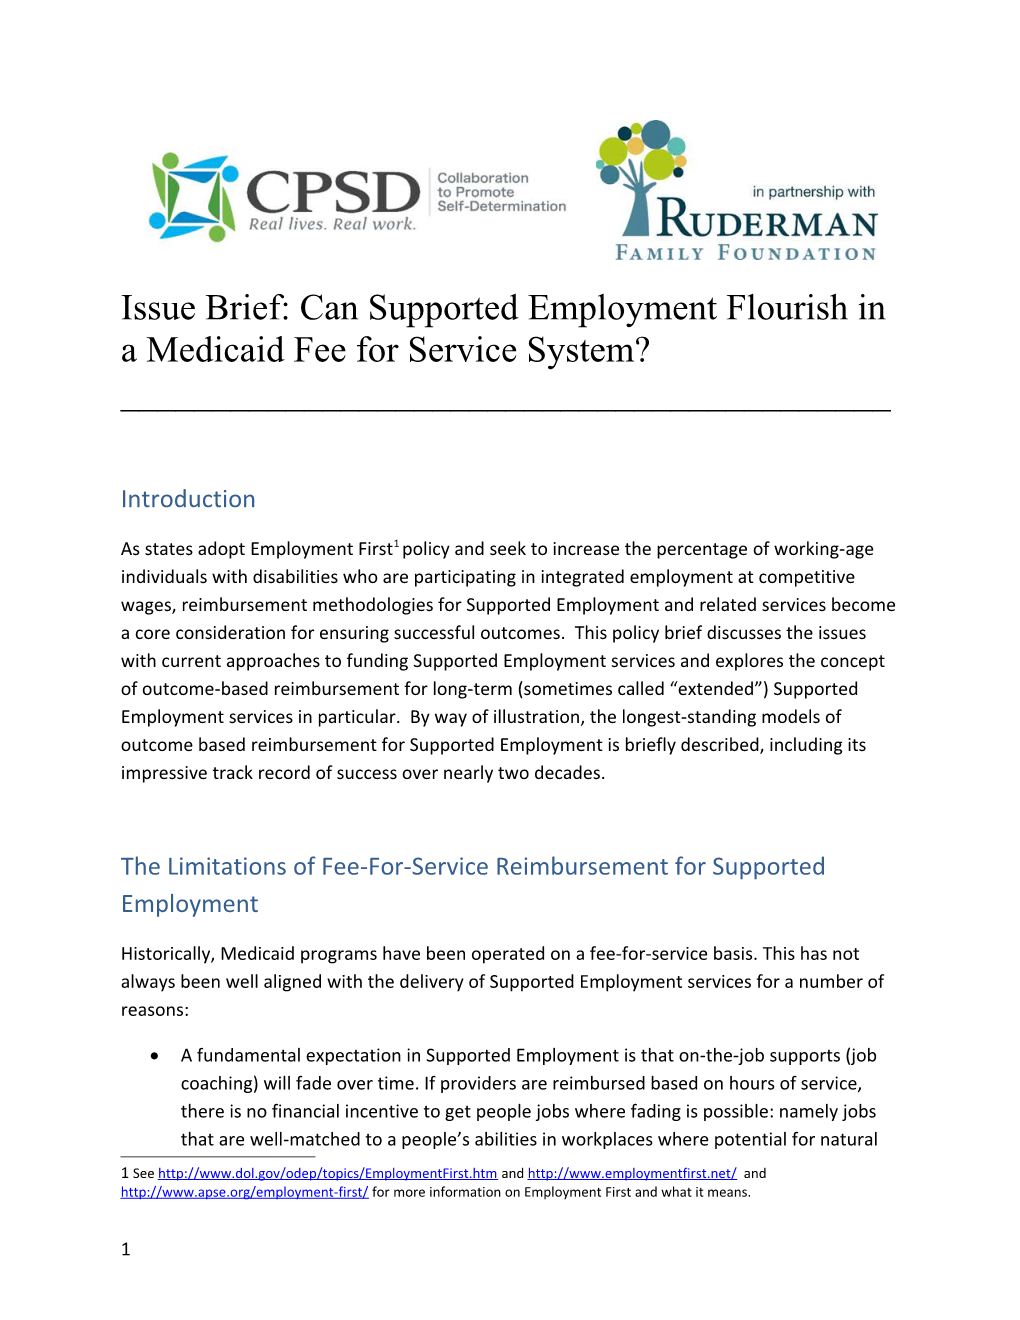 Issue Brief: Can Supported Employment Flourish in a Medicaid Fee for Service System?